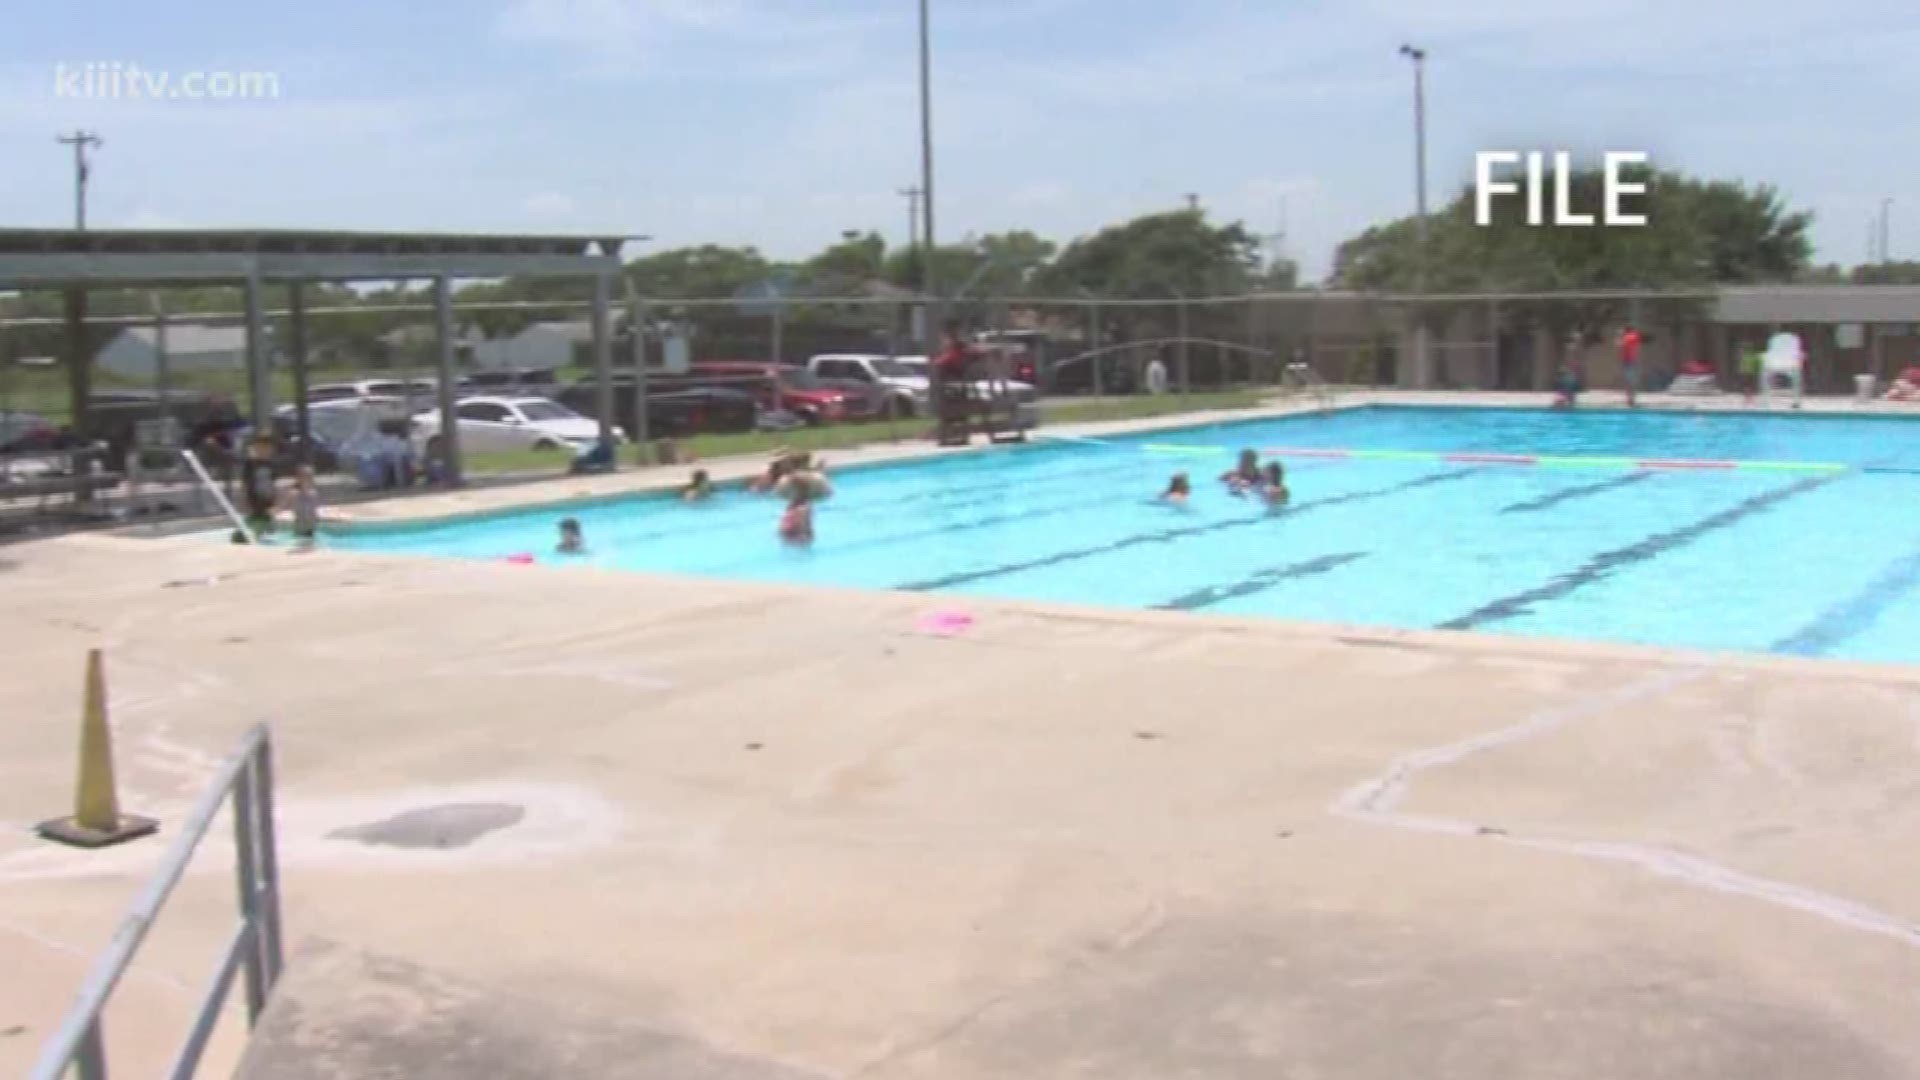 Corpus Christi's Parker Pool is now the property of Nueces County after ownership was transferred Wednesday.